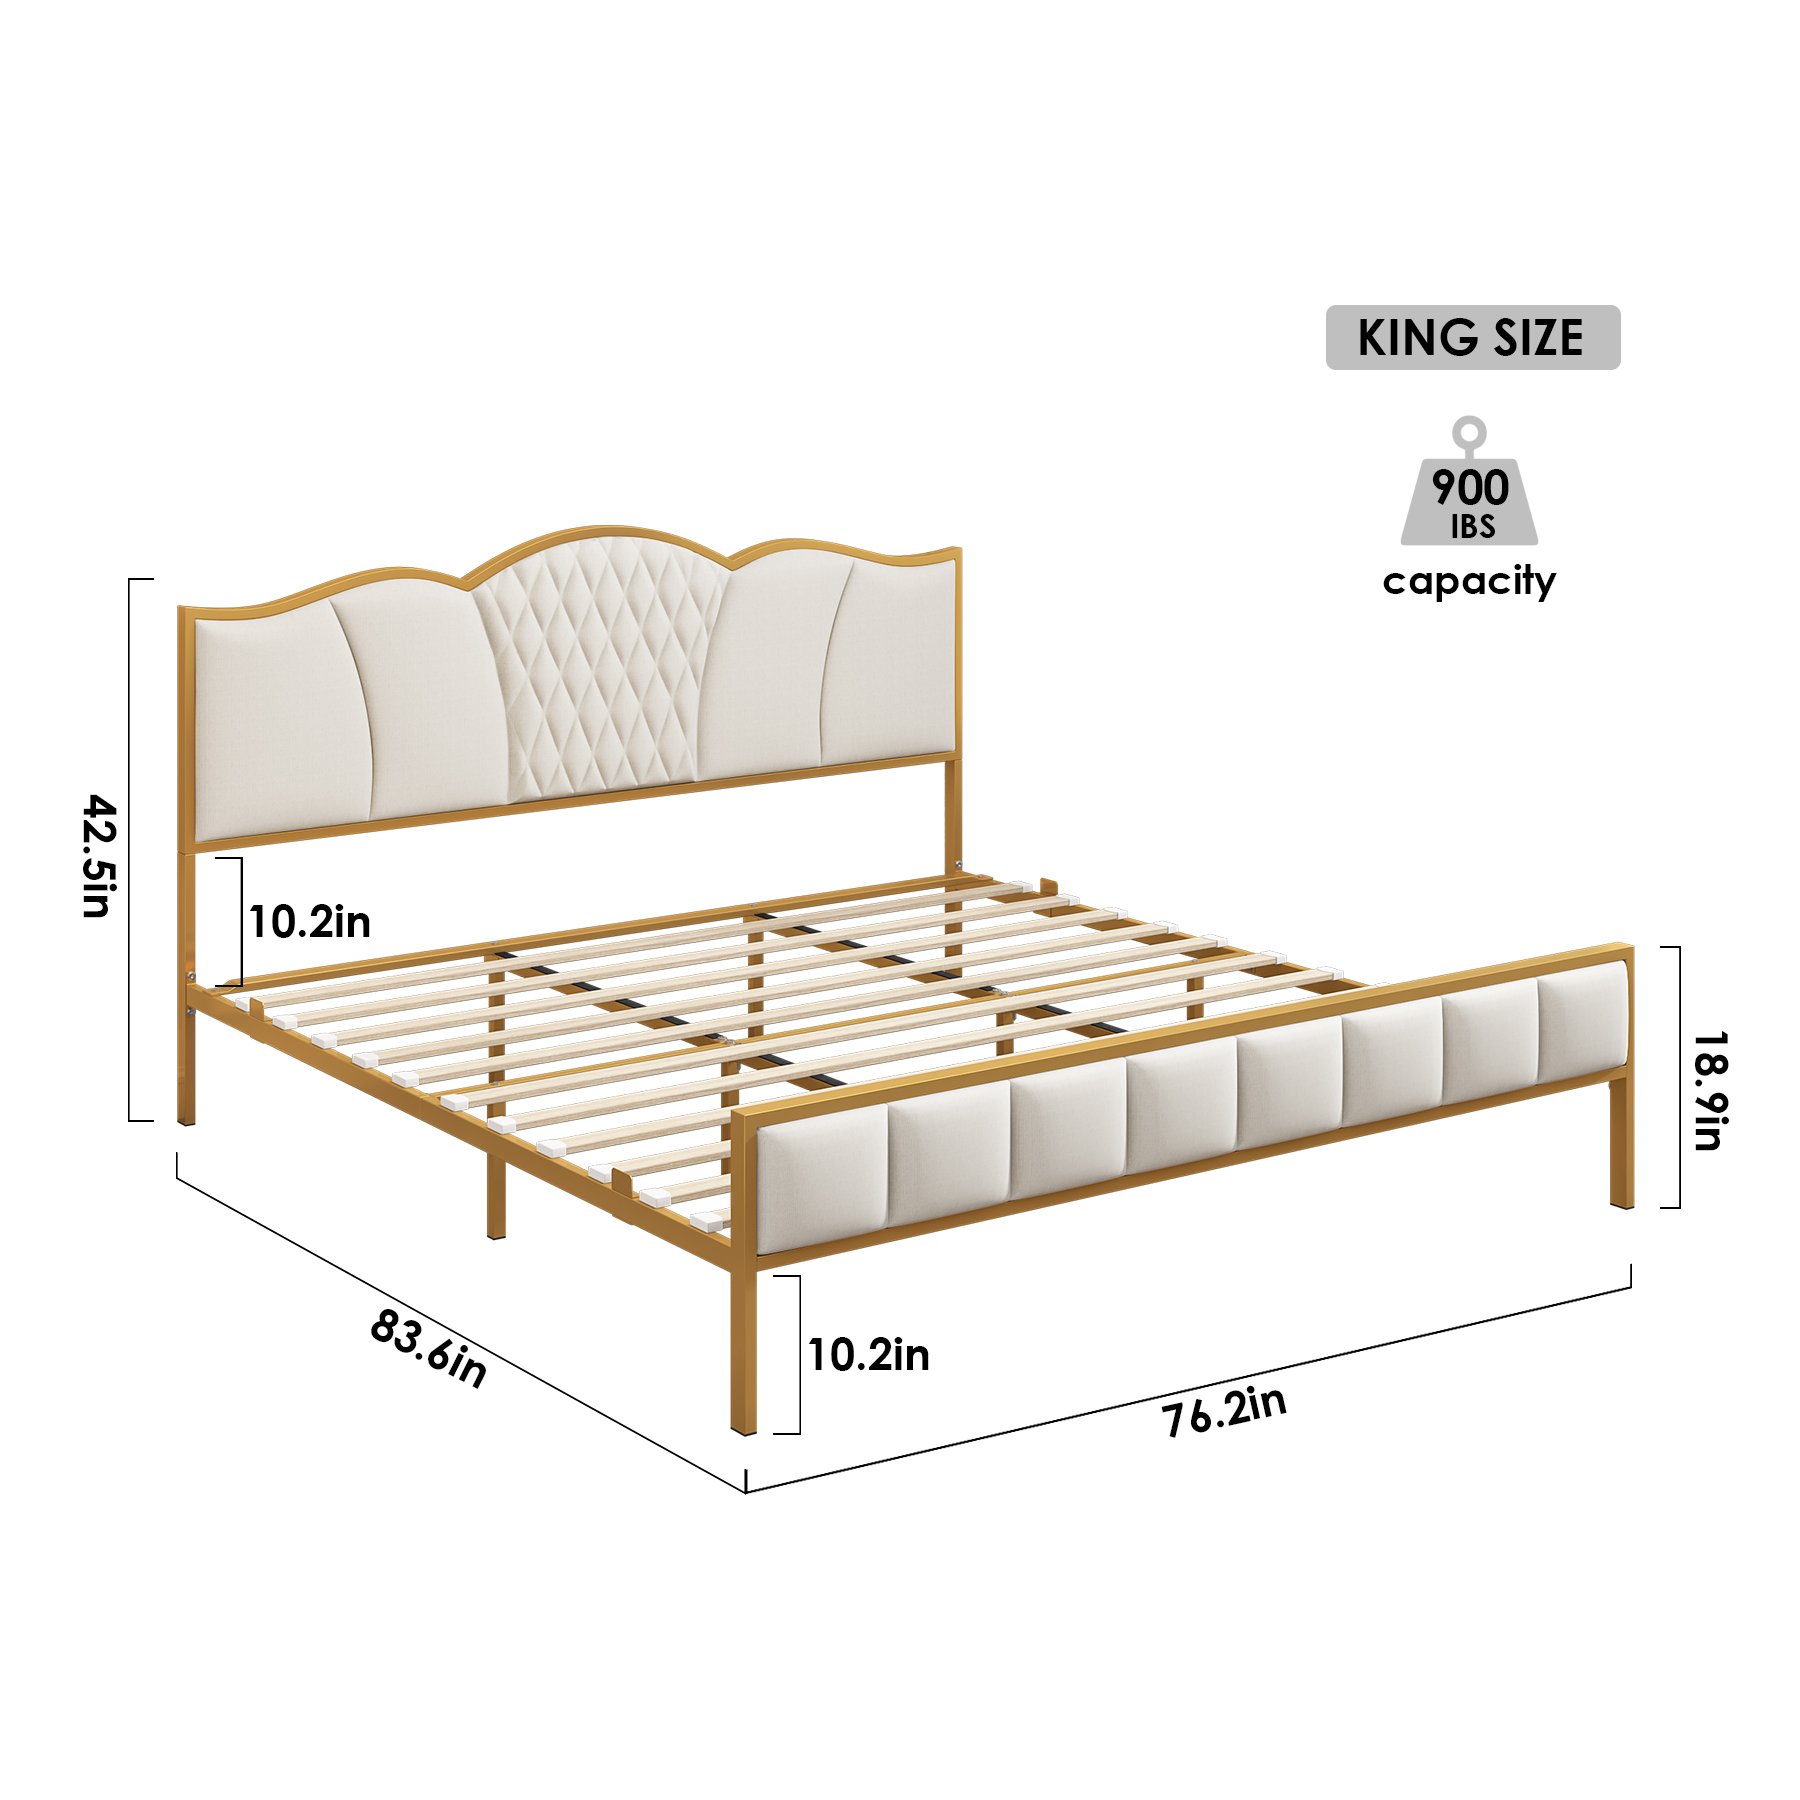 Homfa King Size Metal Bed Frame, Modern Linen Fabric Upholstered Platform Bed Frame with Tufted Headboard, Beige and Gold - image 2 of 10